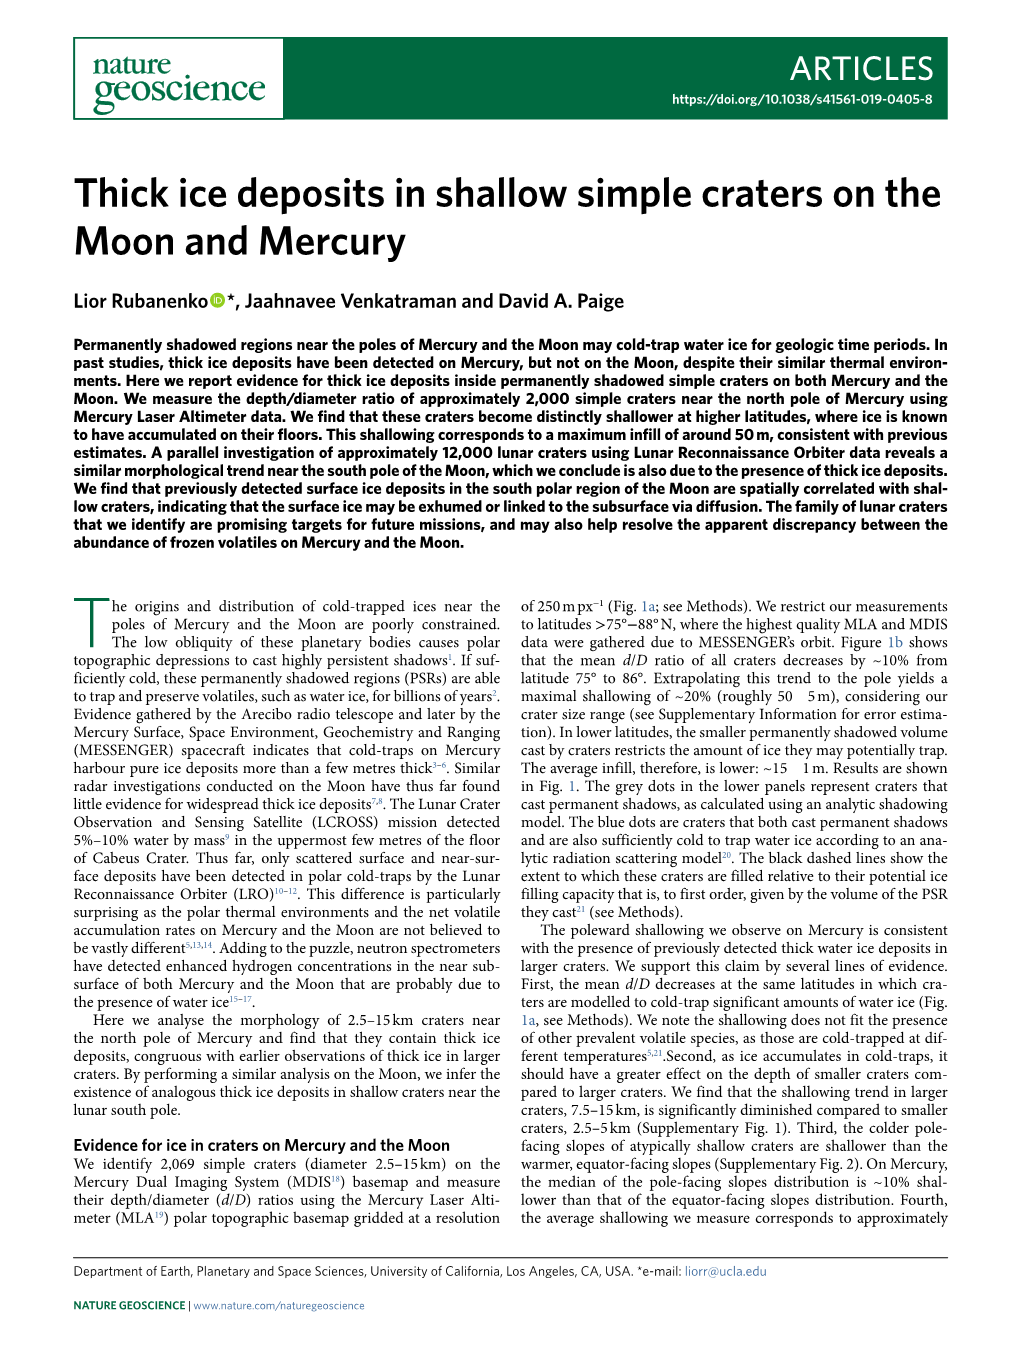 Thick Ice Deposits in Shallow Simple Craters on the Moon and Mercury